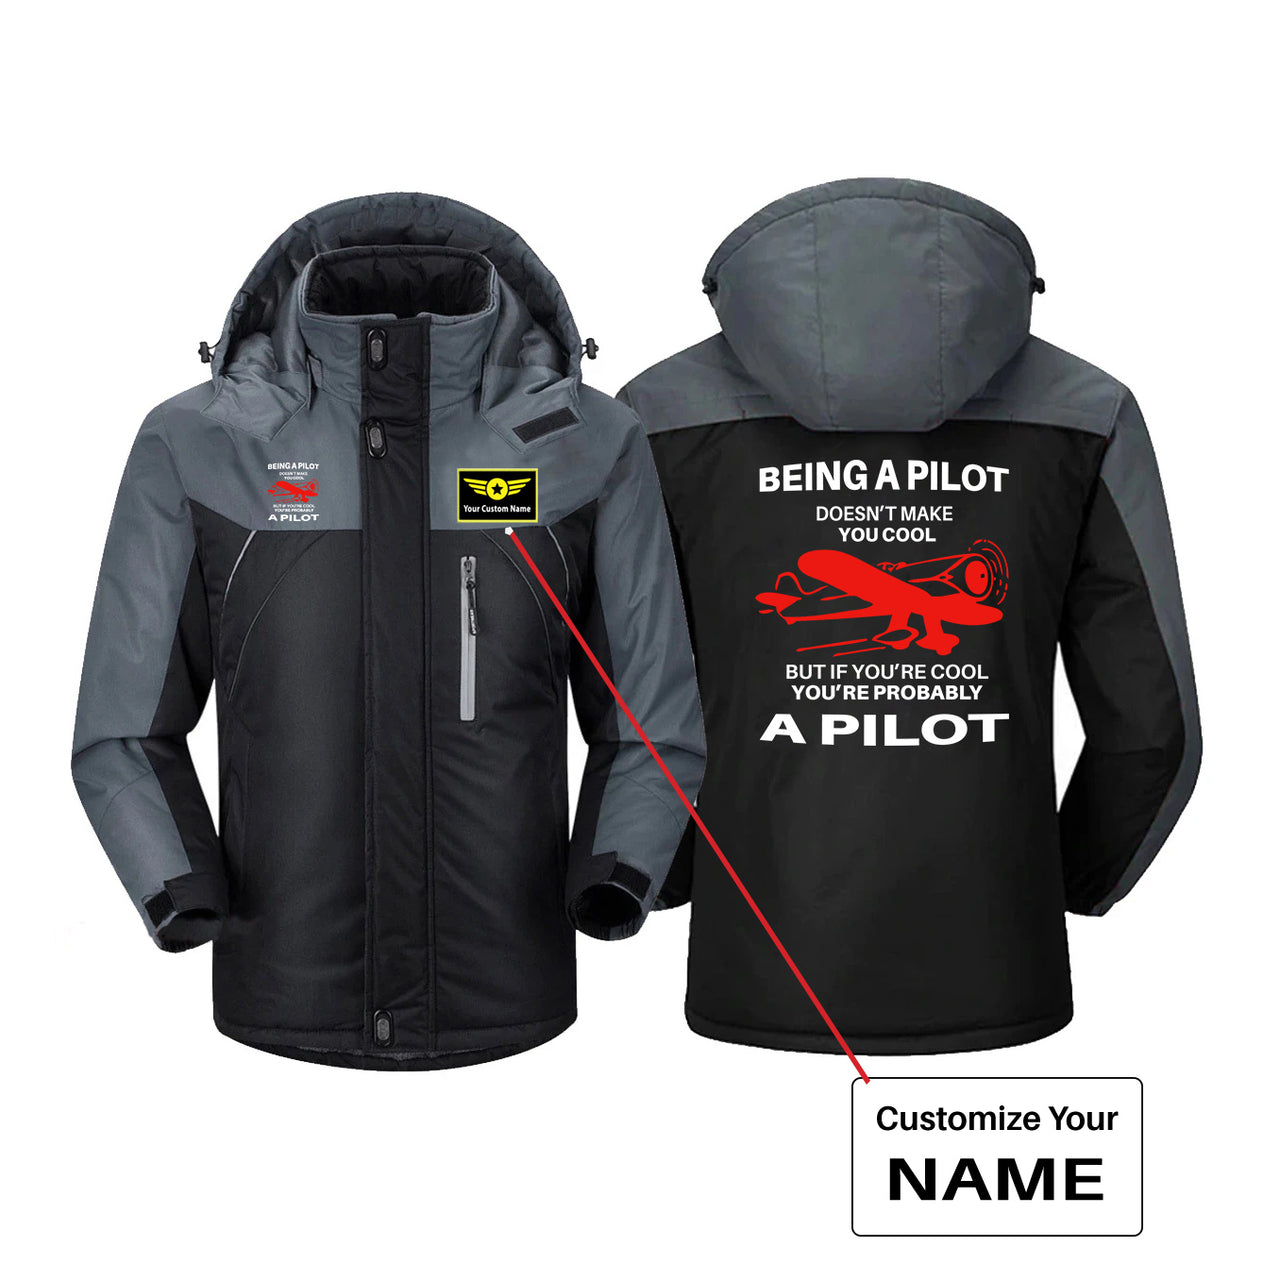 If You're Cool You're Probably a Pilot Designed Thick Winter Jackets